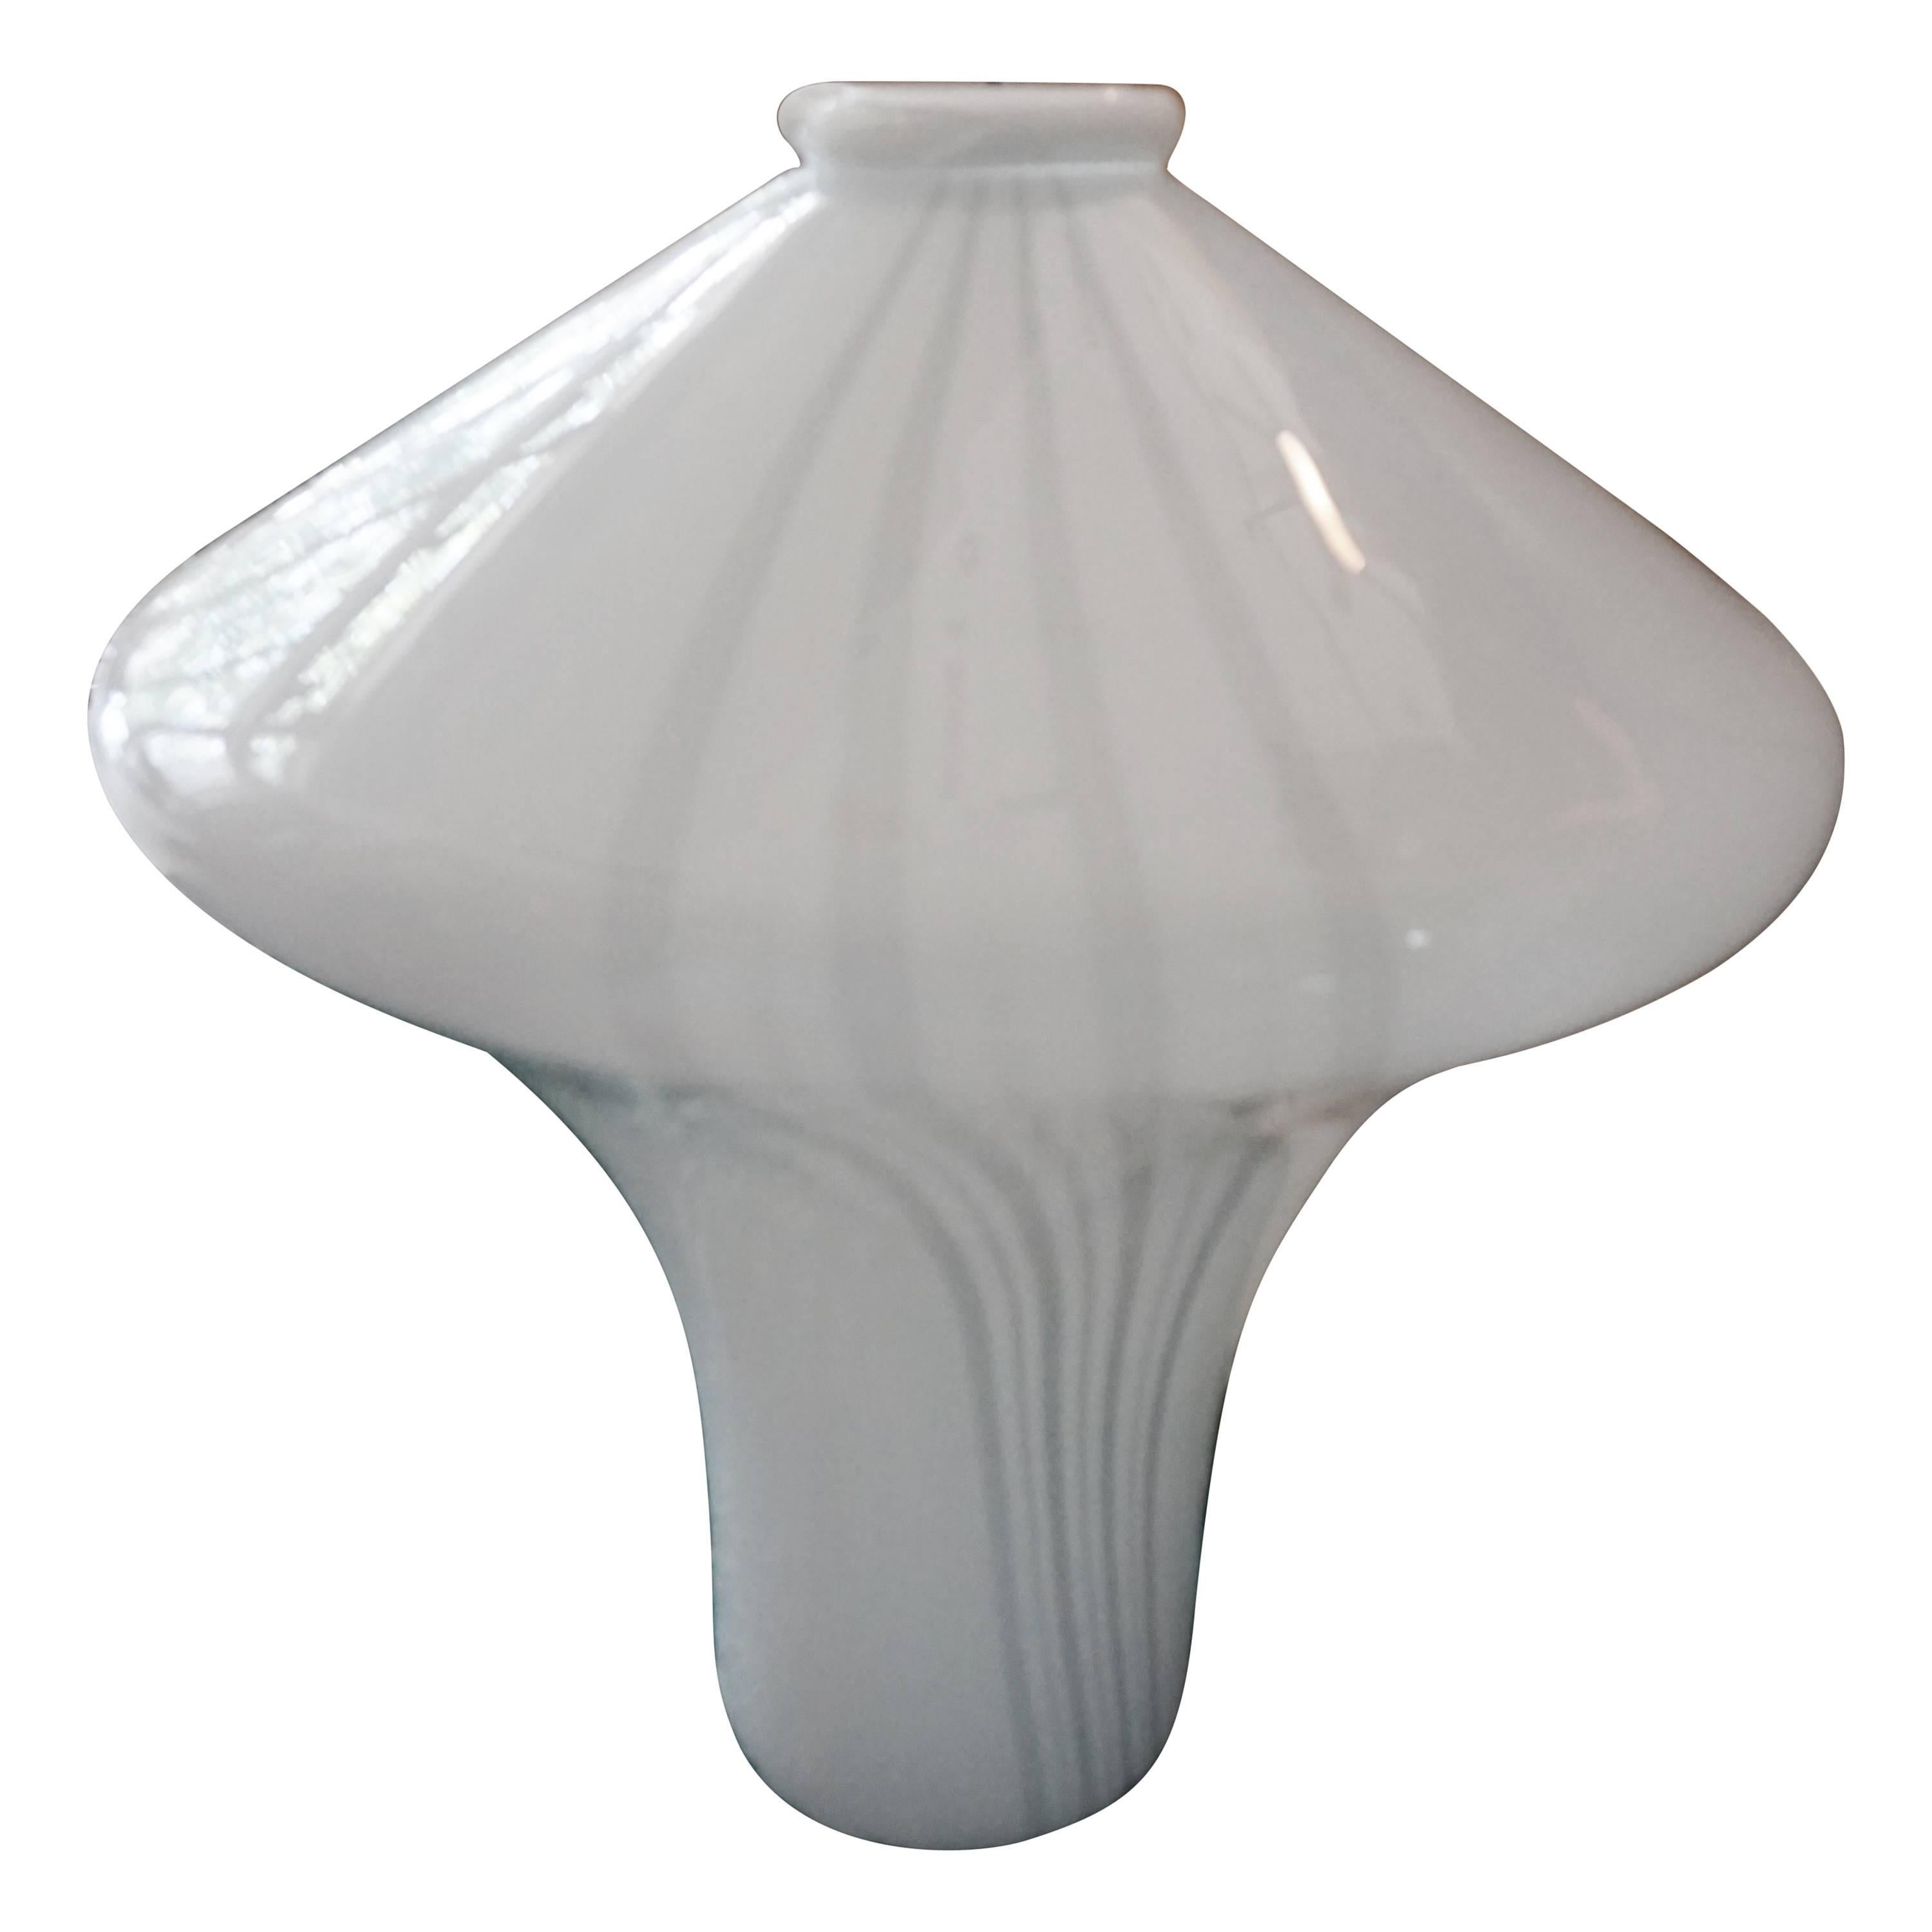 Large Scale Handblown Murano Glass Lamp by Vistosi For Sale